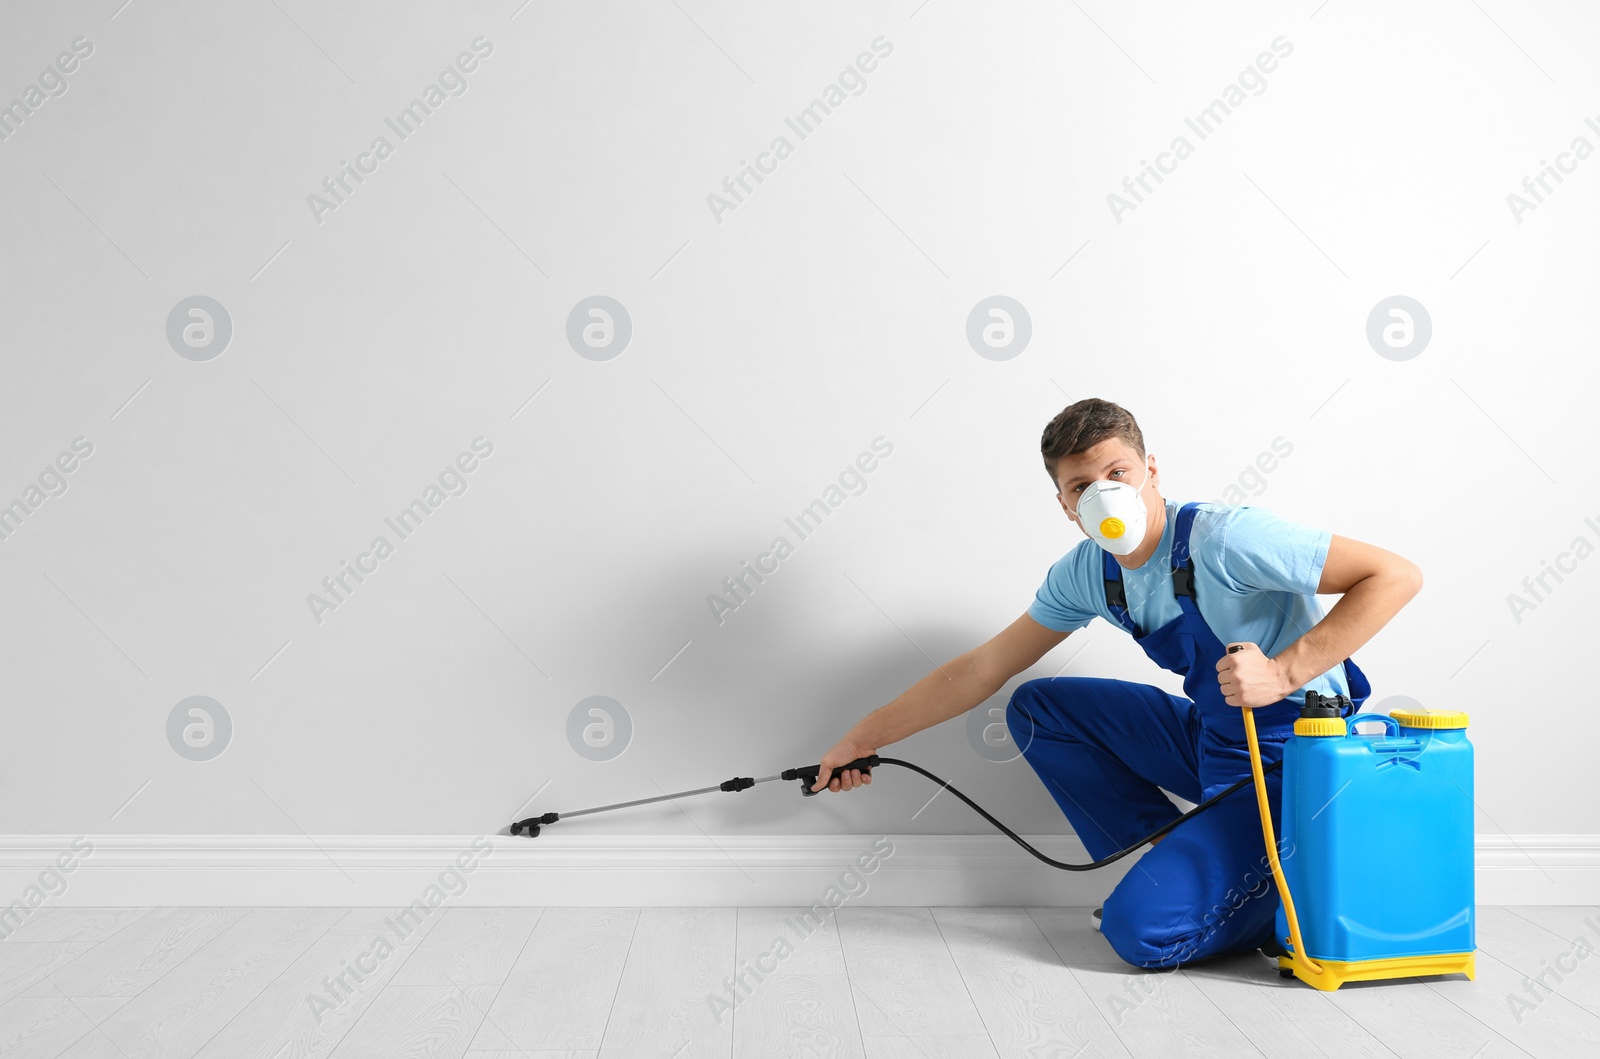 Photo of Pest control worker spraying pesticide in room. Space for text